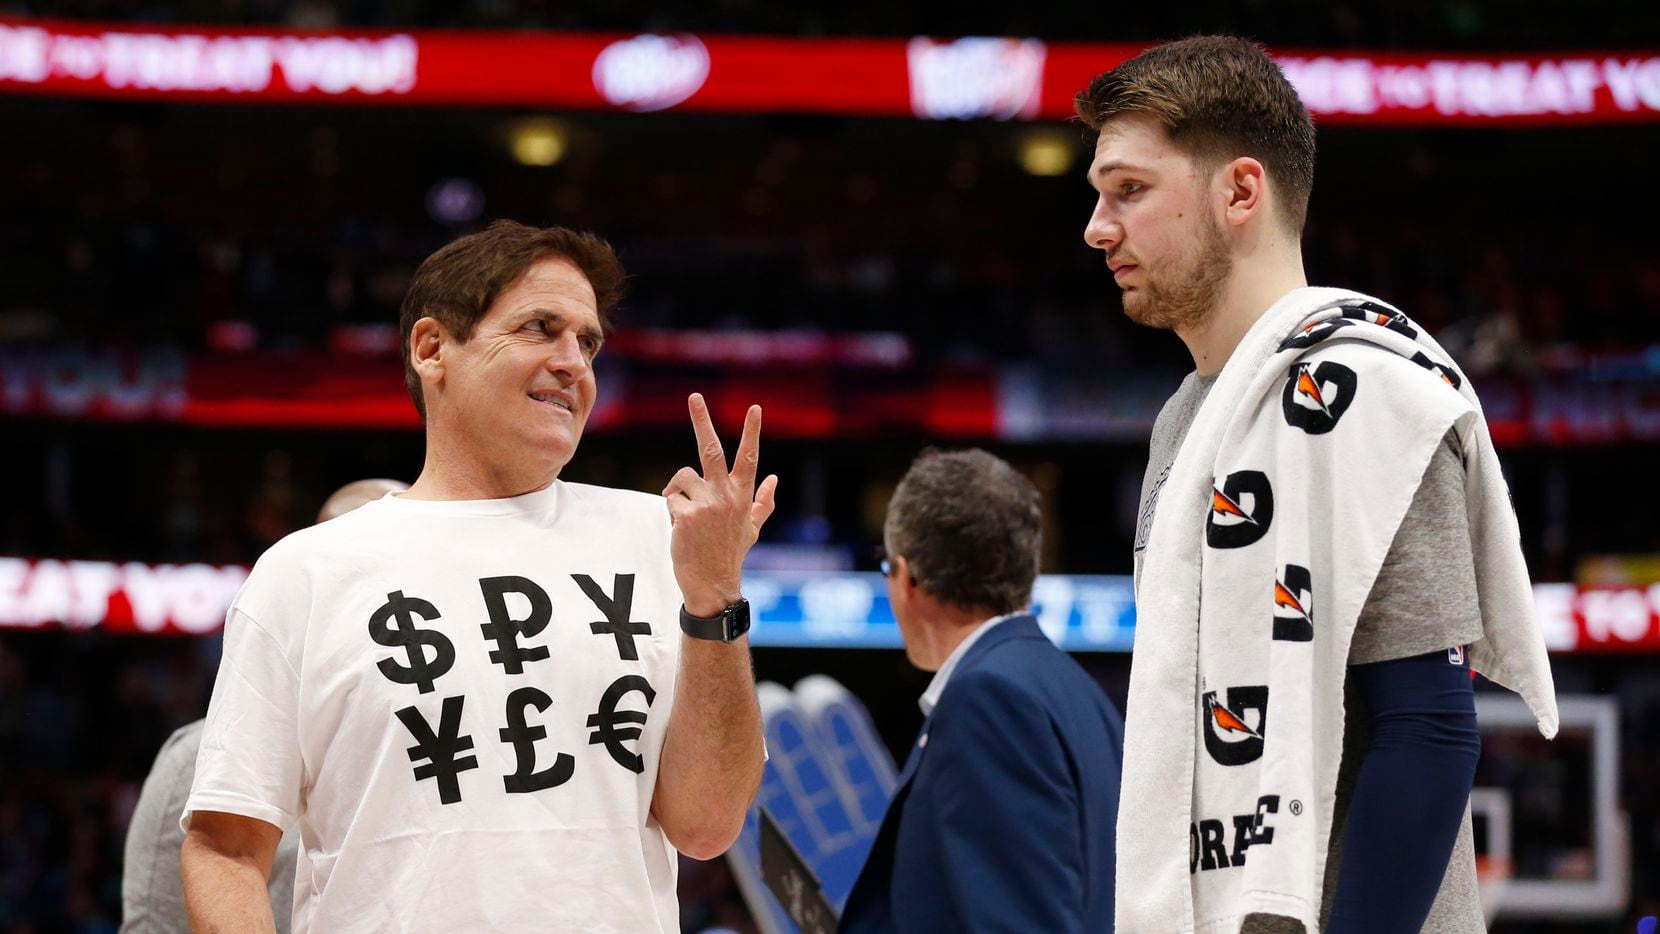 Dallas Mavericks owner Mark Cuban sports a shirt with money signs as he talks to Dallas Mavericks guard Luka Doncic (77) during the second half of play at American Airlines Center in Dallas on Friday, March 6, 2020. Dallas Mavericks defeated the Memphis Grizzlies 121-96.